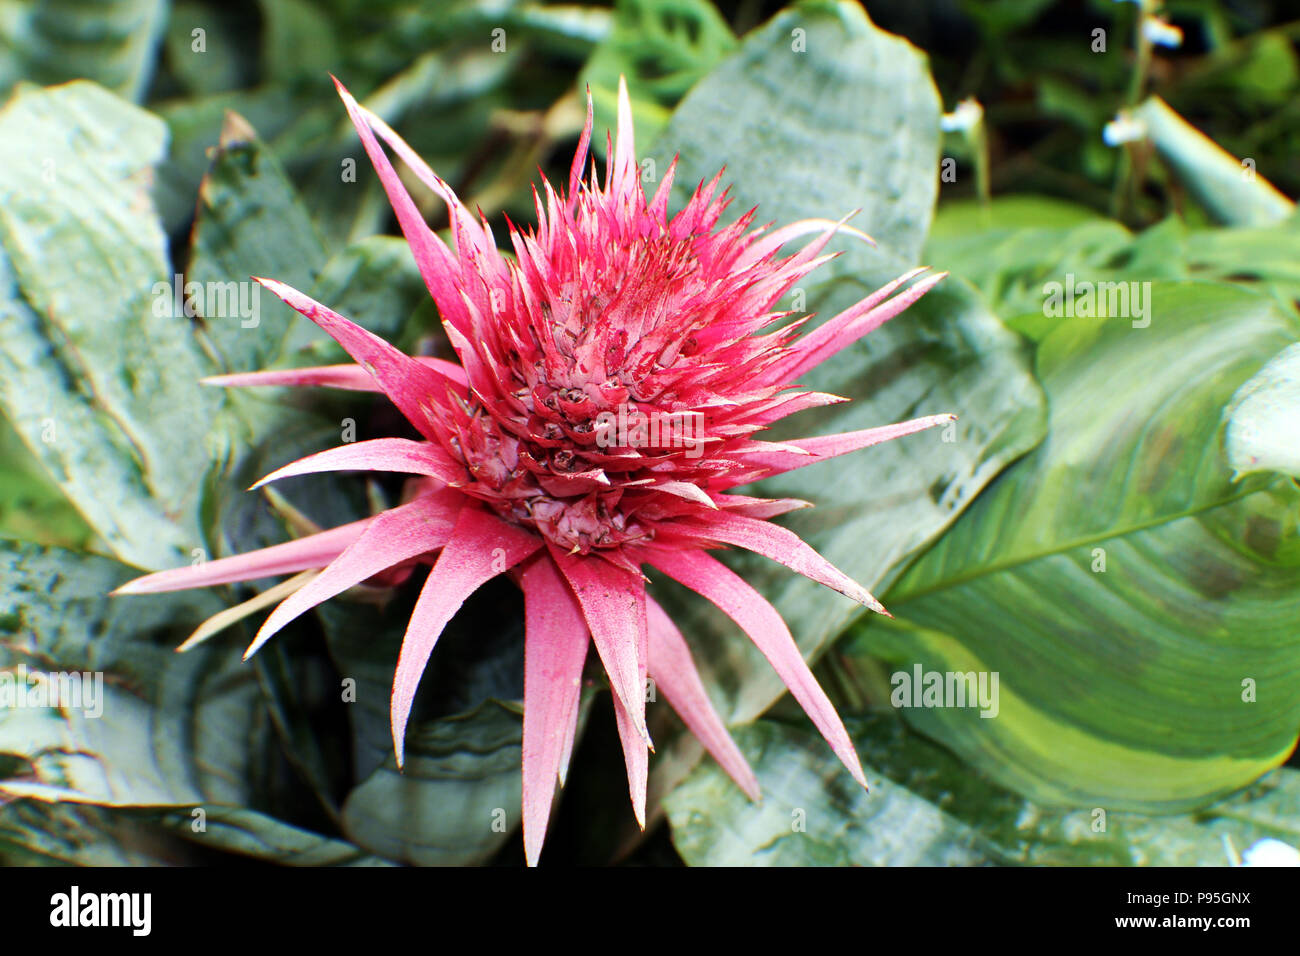 Close up of a large pink flower on an Aechmea, Bromeliad plant Stock Photo